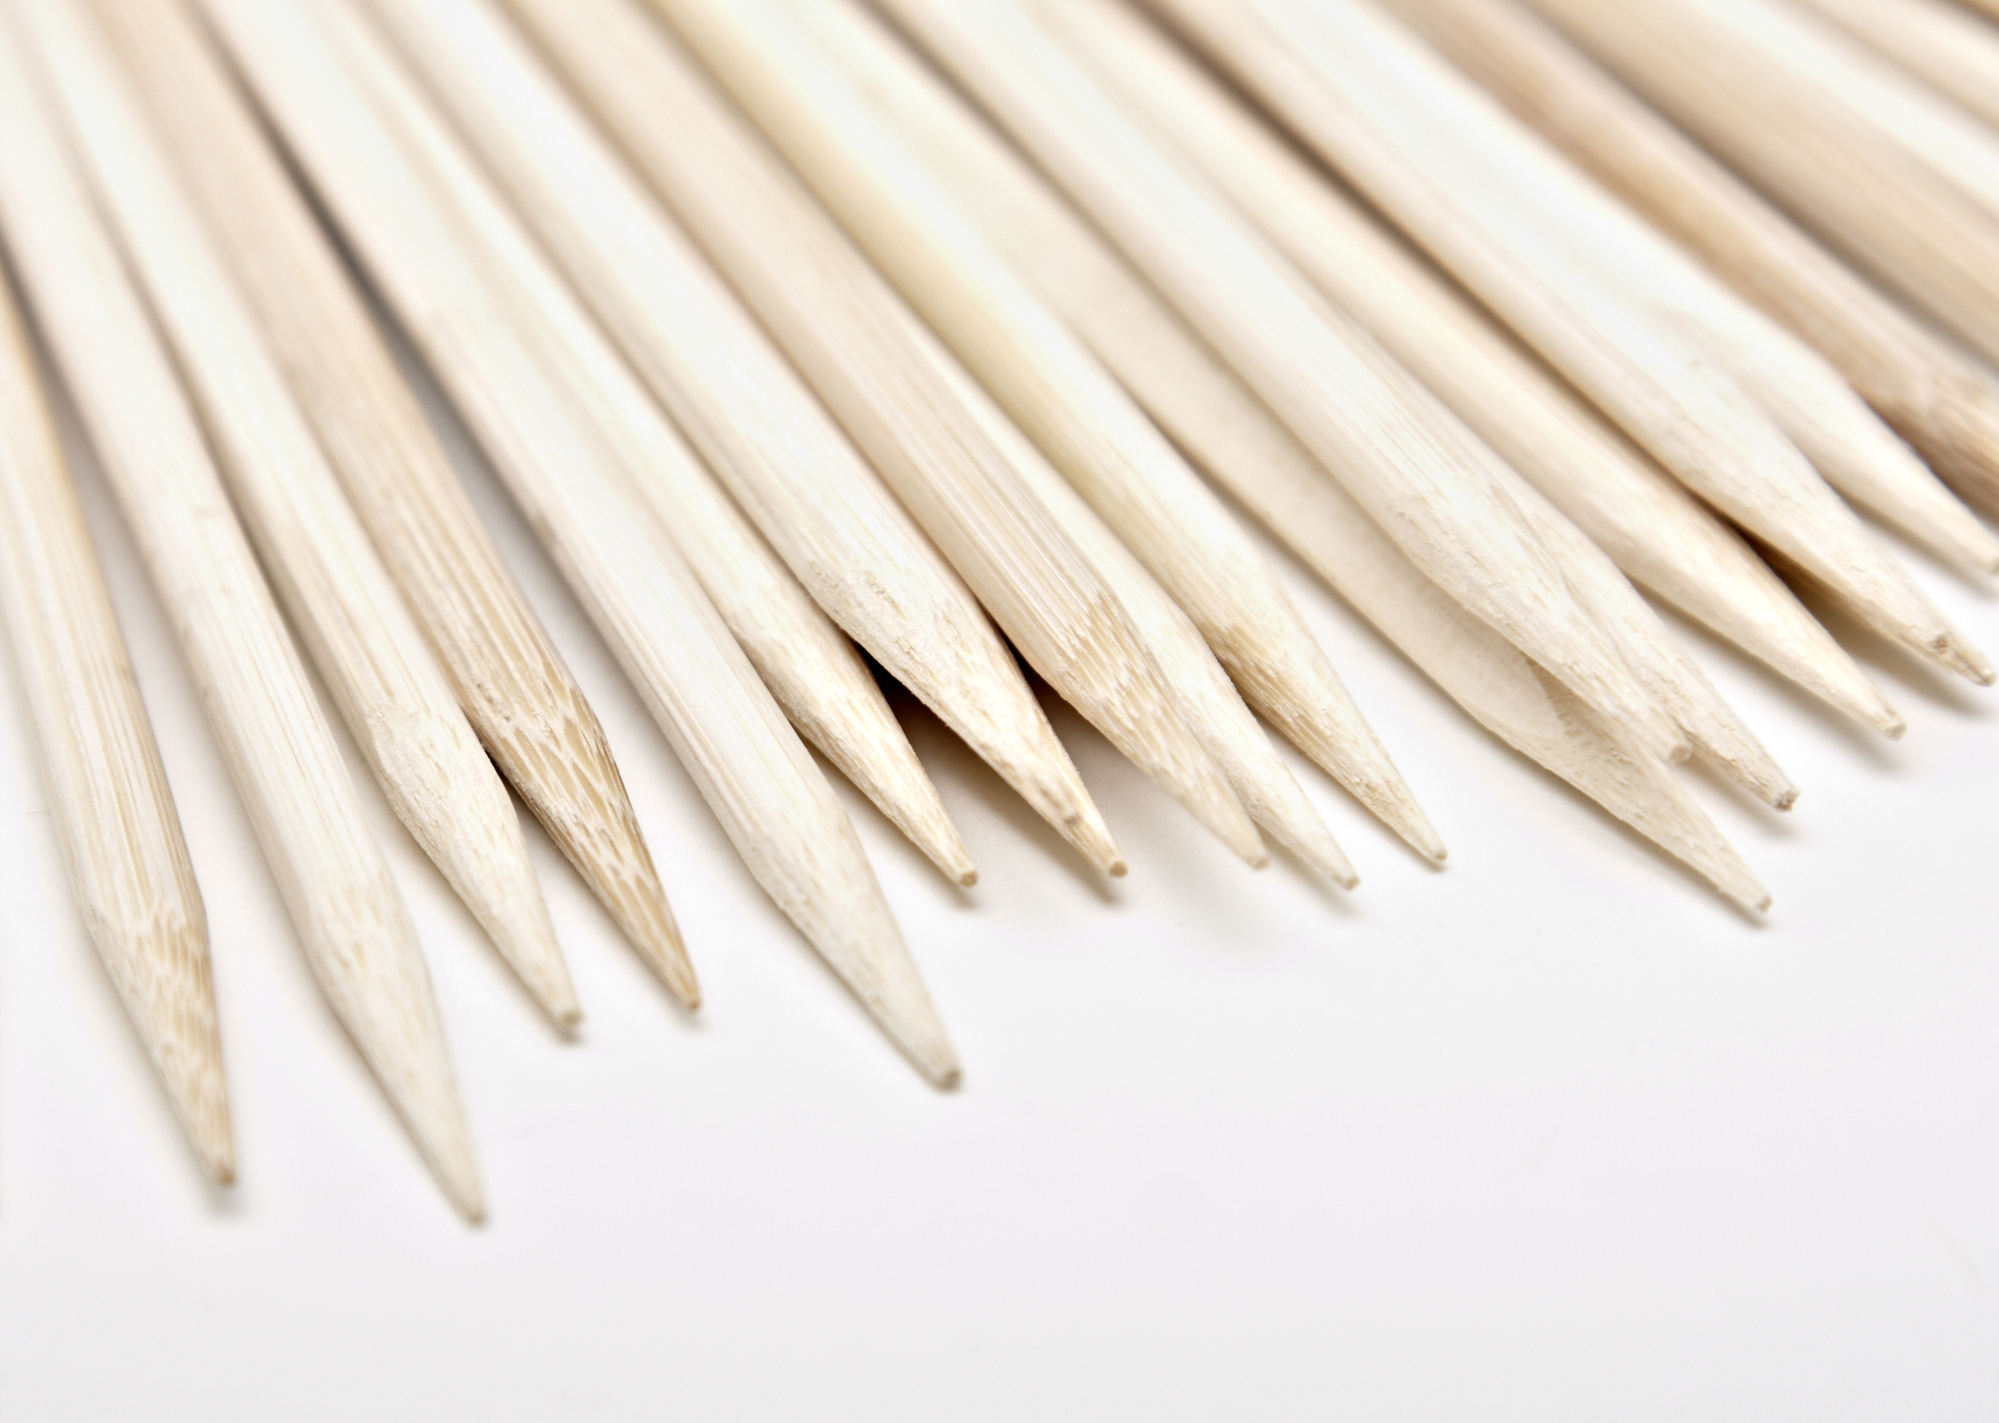 GoodCook Silver Bamboo 12" Skewers Pack, 100 Count - image 3 of 6